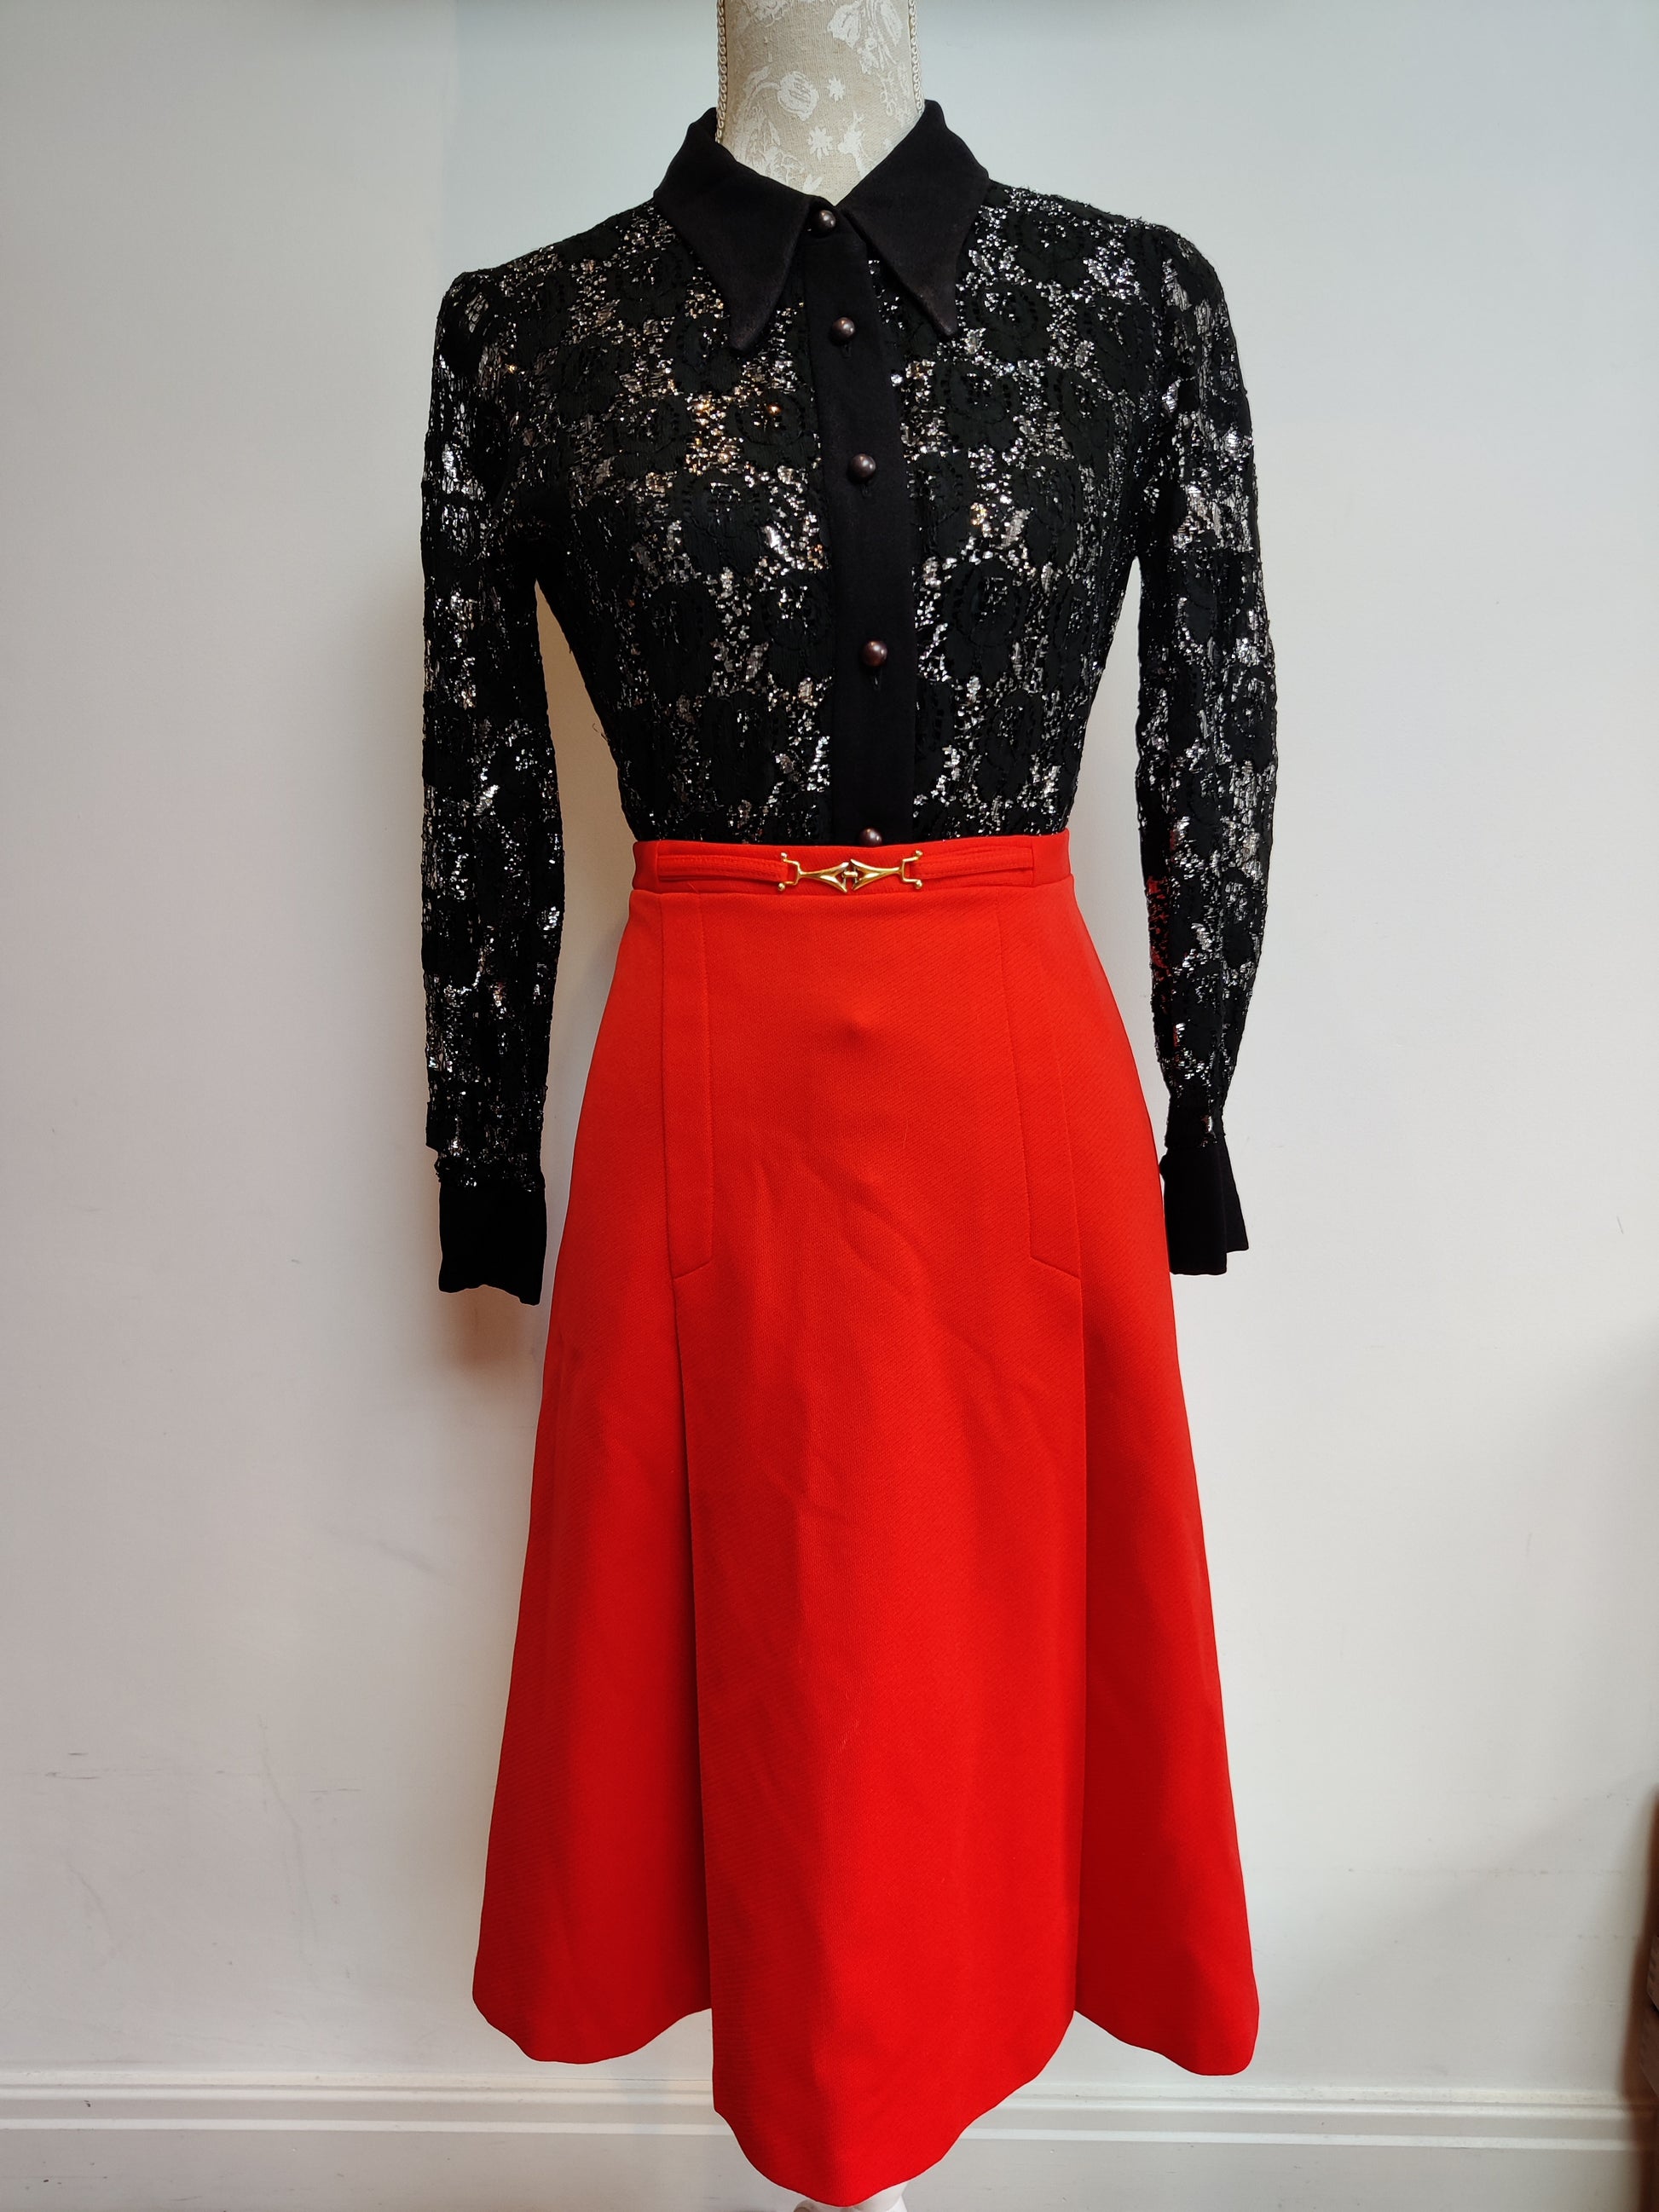 60s mod skirt in red and gold